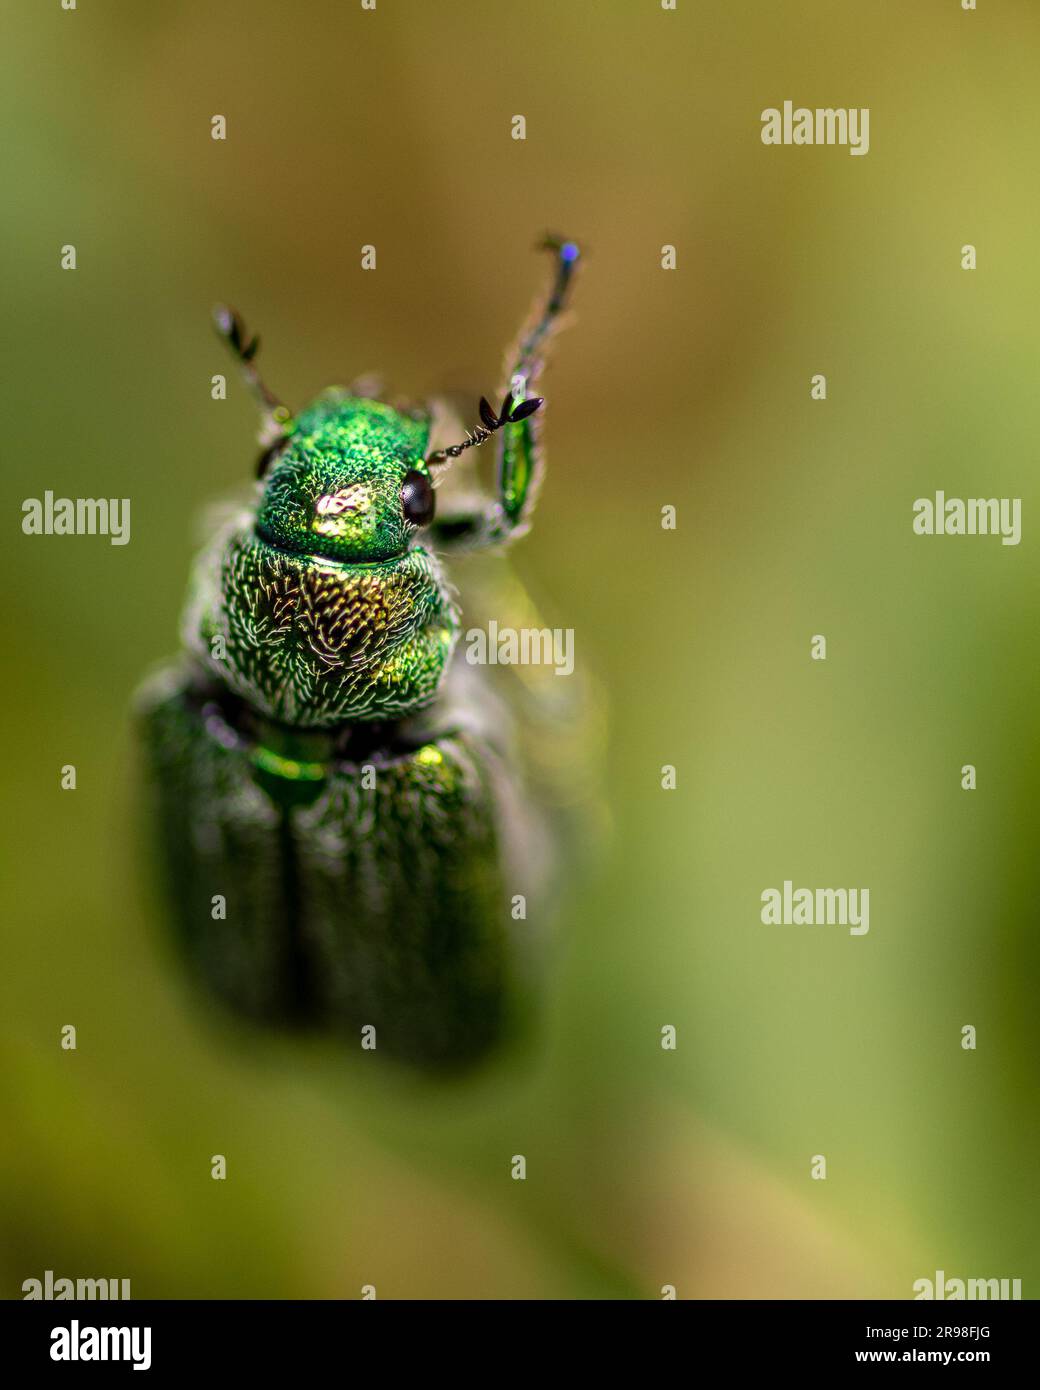 A closeup of a vibrant green flower chafer insect on a green leaf Stock Photo